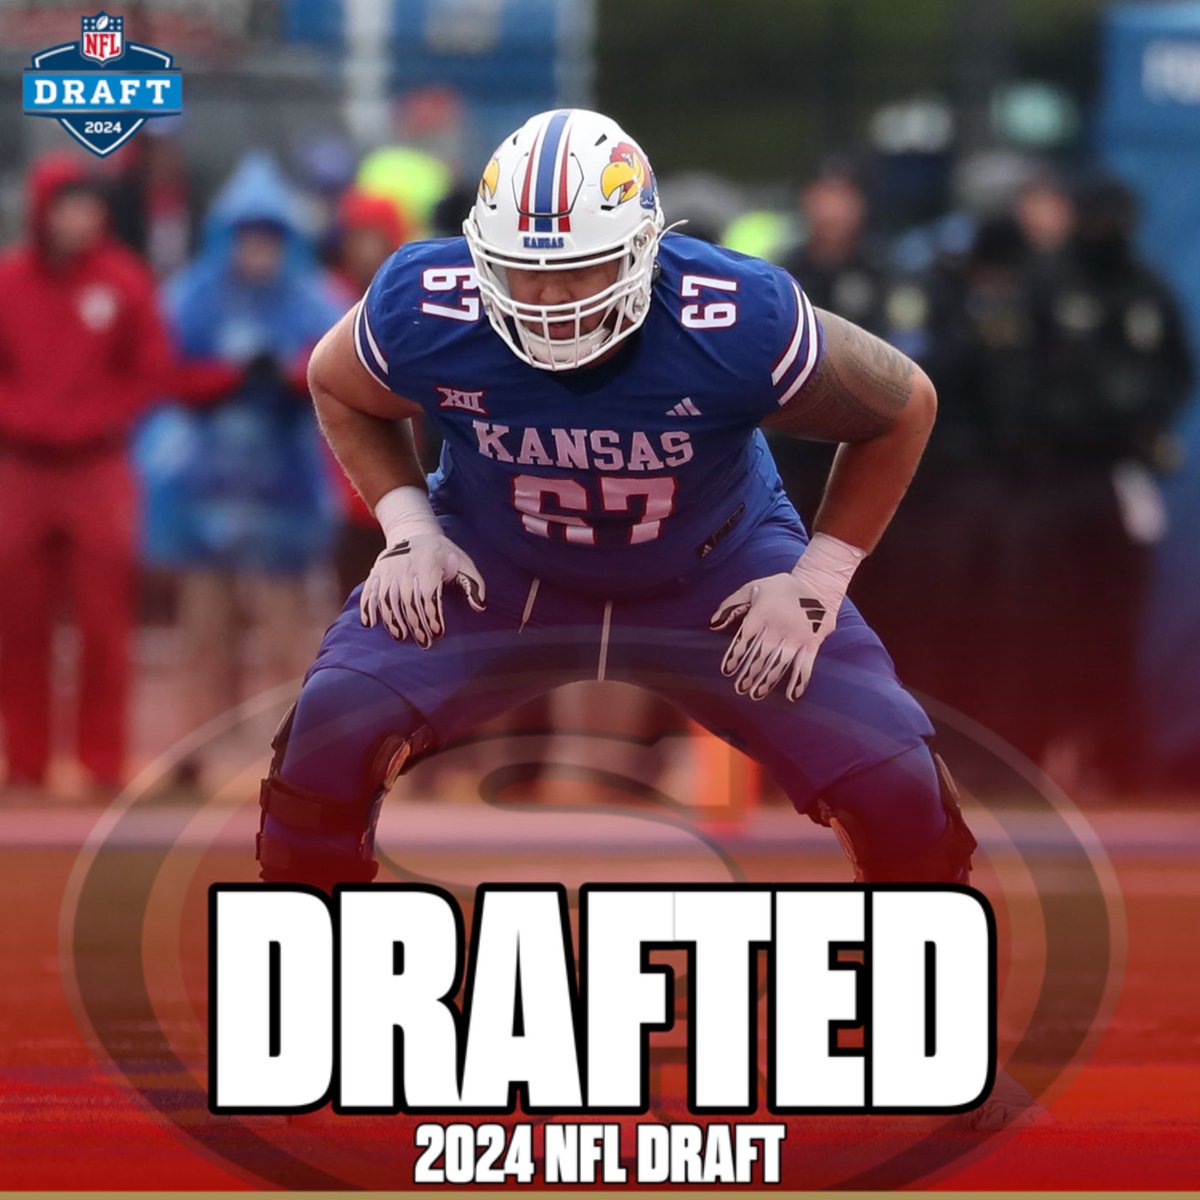 Niners trade up to select Kansas OL Dominick Puni with No. 86 overall pick of 2024 NFL Draft